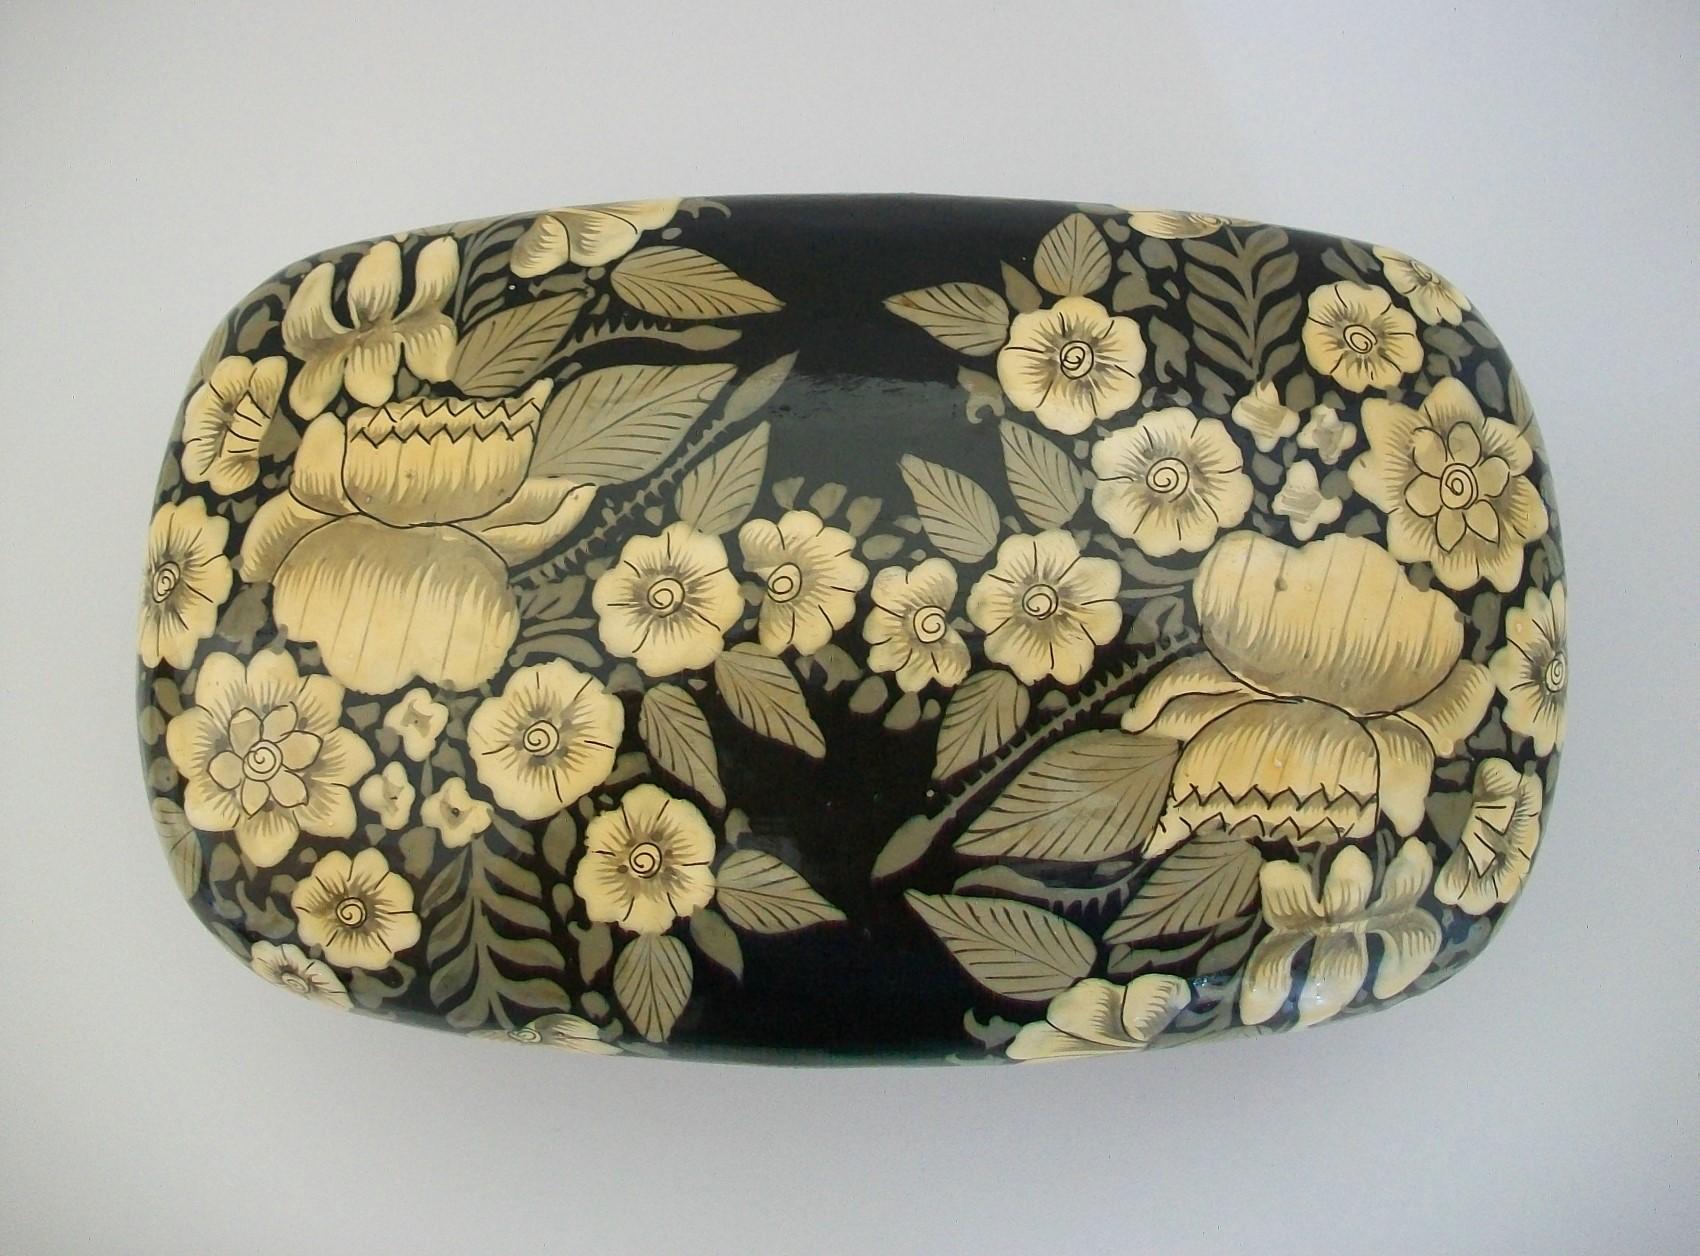 Vintage South Asian / Kashmir hand painted papier mâché box with removeable lid - featuring a profuse floral pattern over the top and sides set against a black lacquer background - high gloss finish - remnants of original paper label to the base -